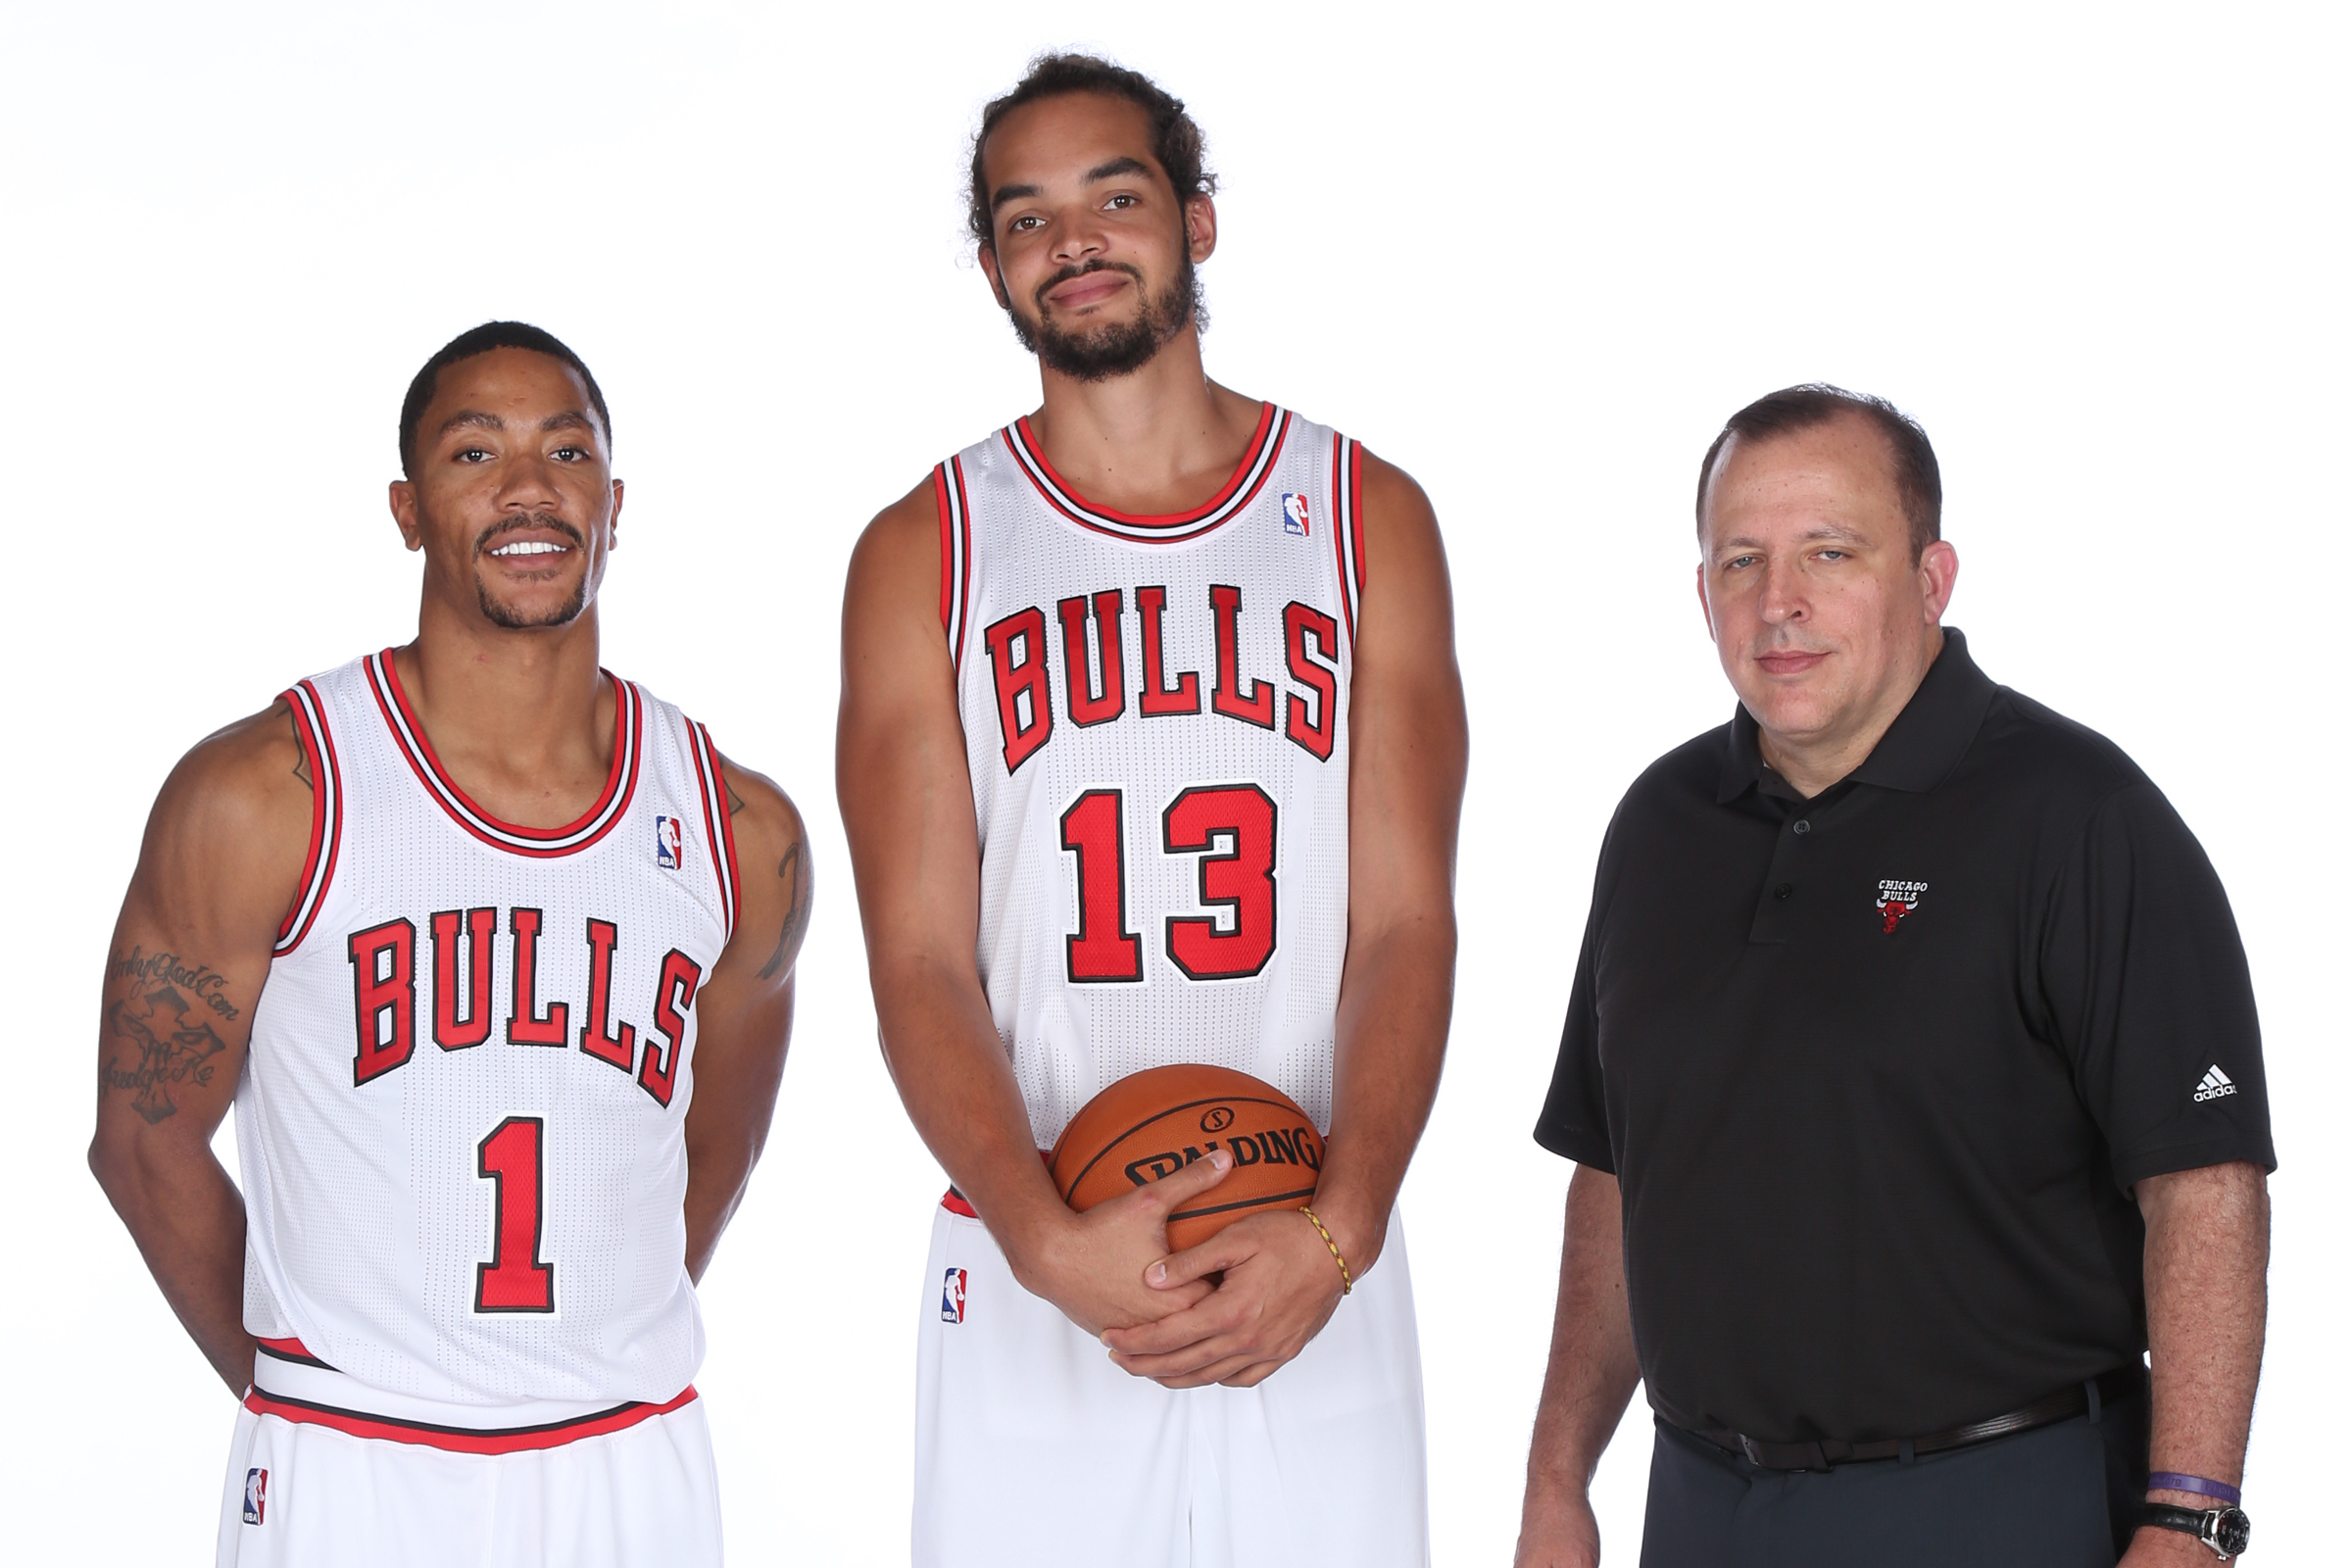 The love story between Chicago Bulls star Derrick Rose and his